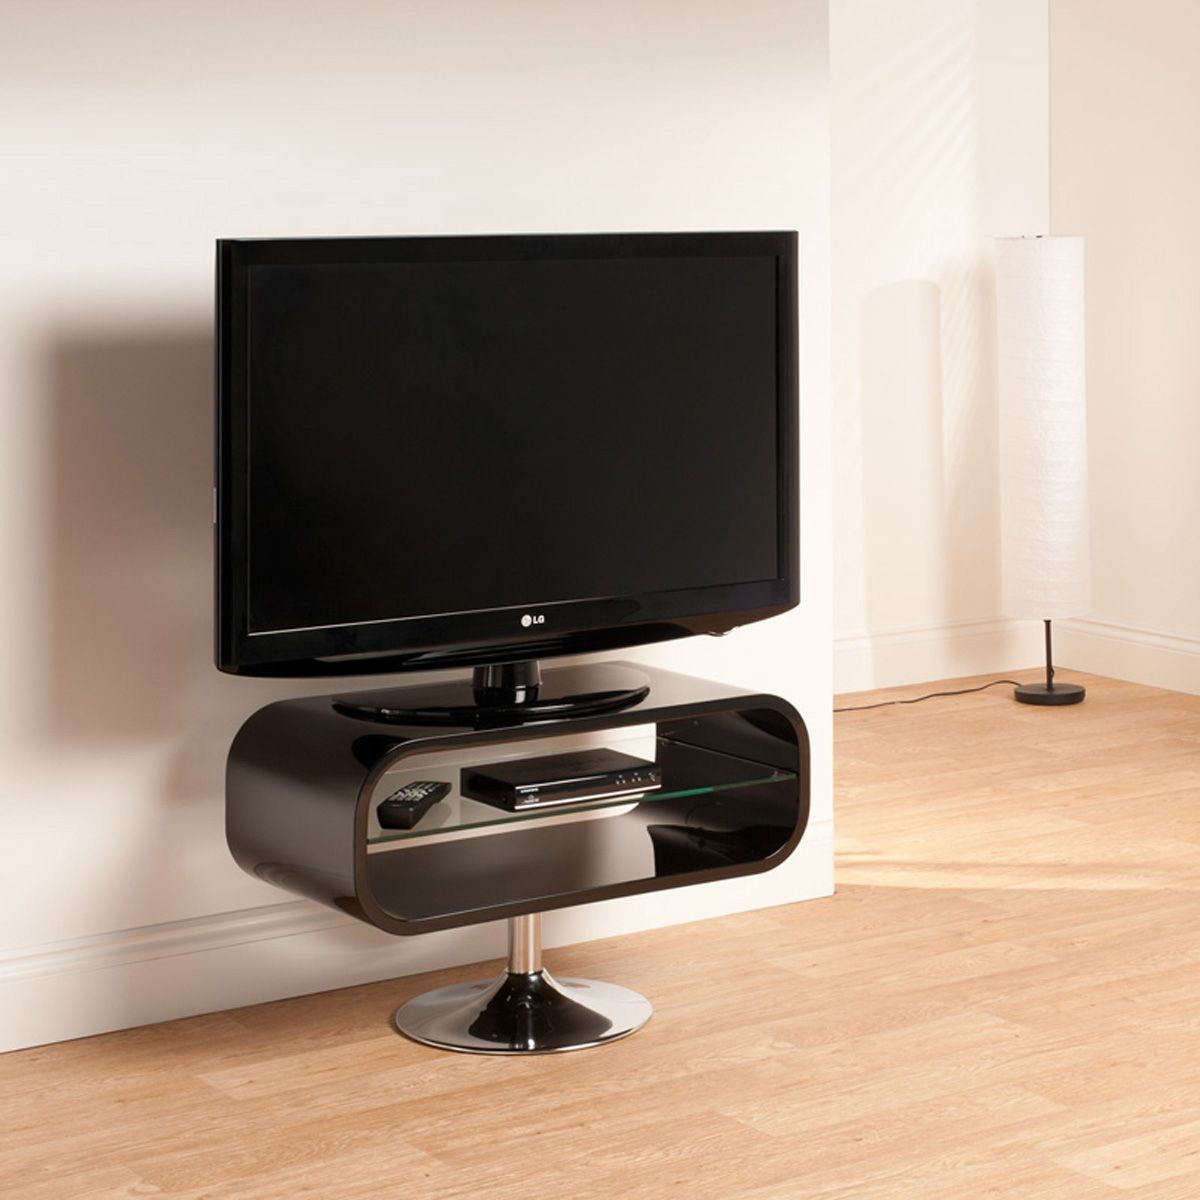 Black Gloss Oval Clear Glass Shelf Lcd Plasma Tv Stand 32 Throughout Black Oval Tv Stand (View 5 of 15)